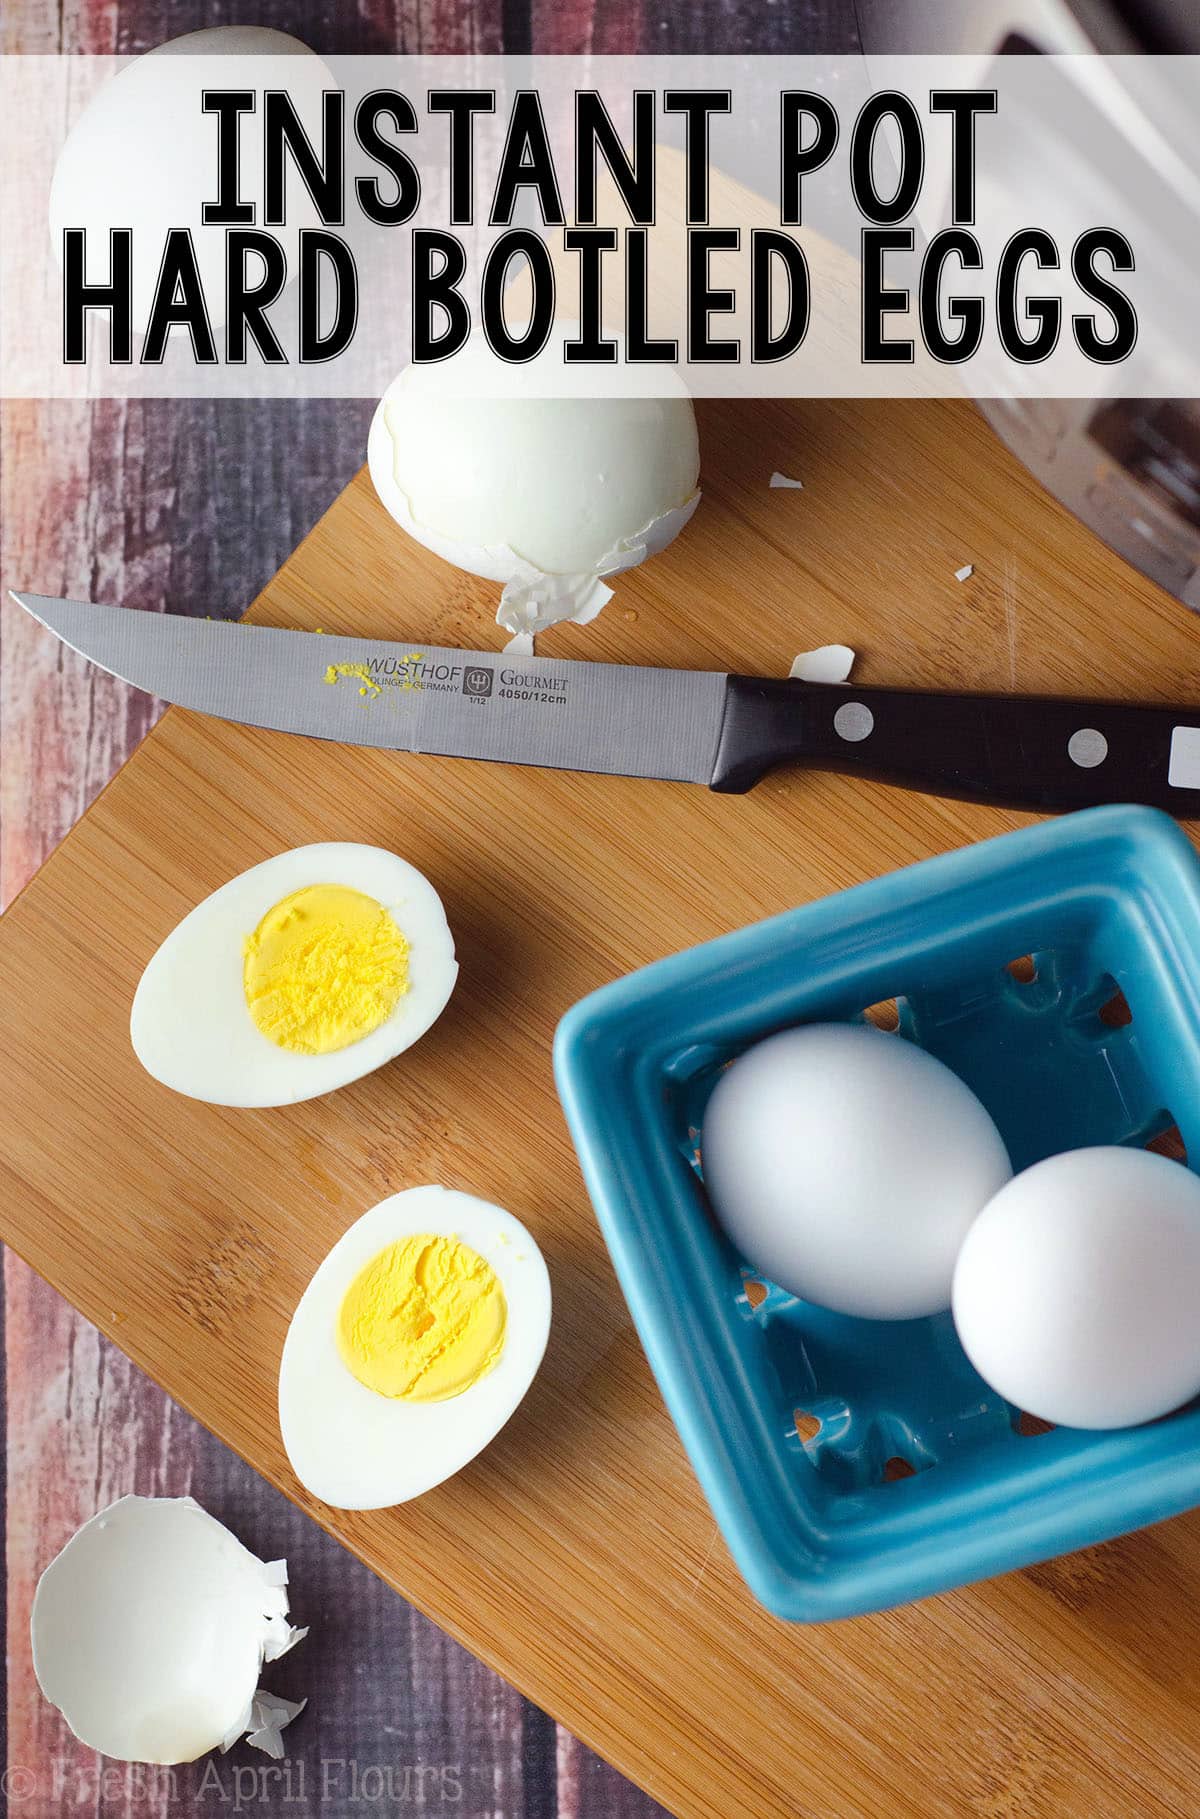 Instant Pot Perfect Hard Boiled Eggs: The 7-7-7 rule gets hard cooked eggs that are easy to peel and the perfect texture every time! via @frshaprilflours